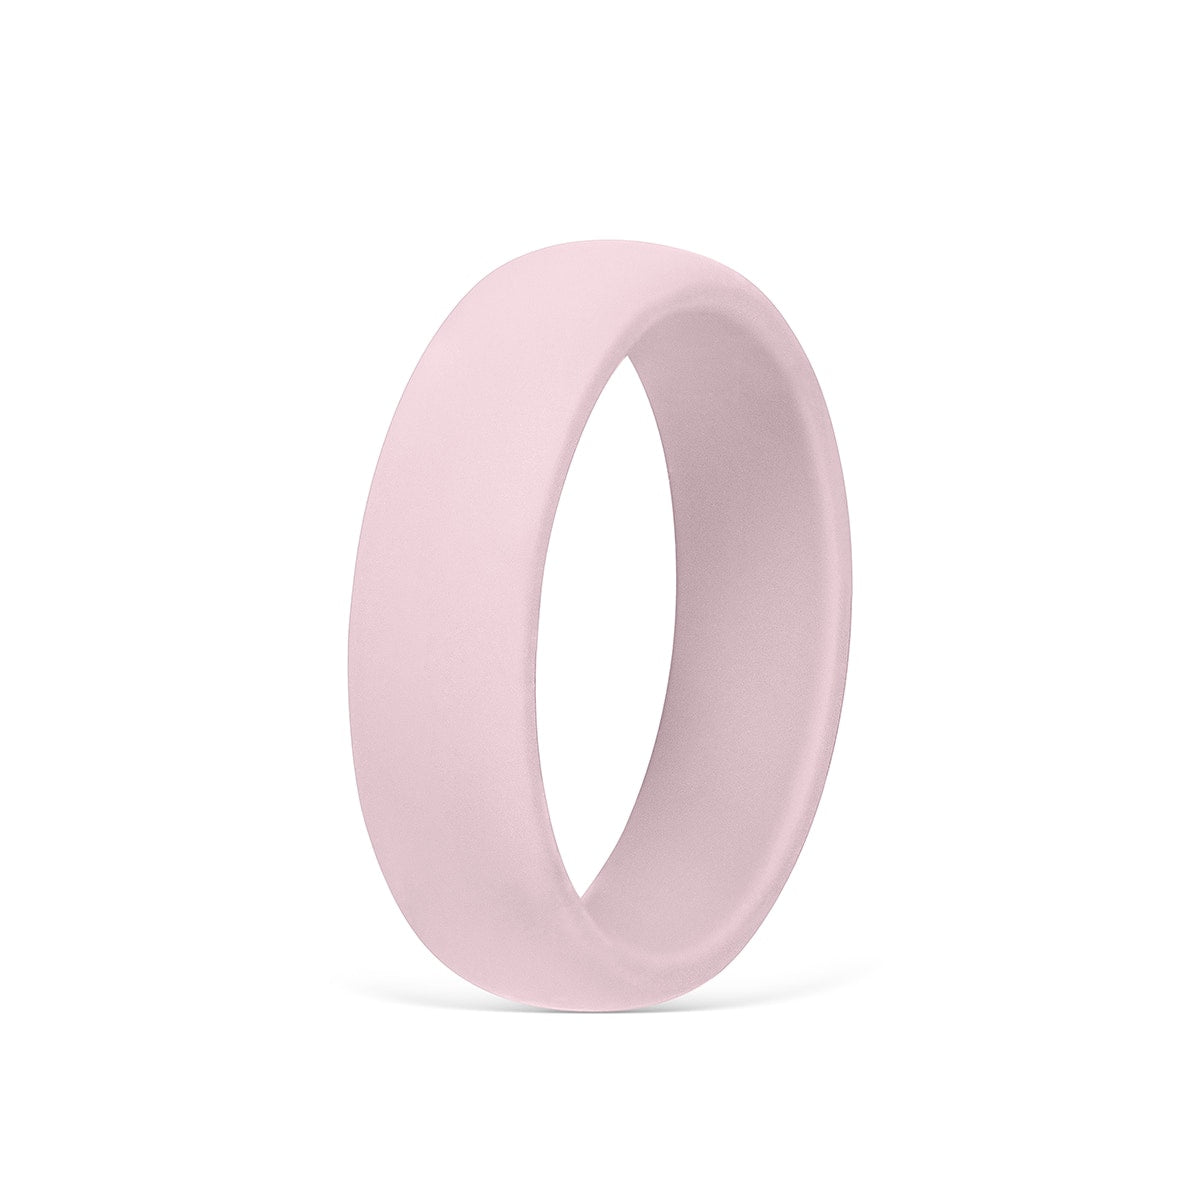 Pink womens silicone wedding bands slater